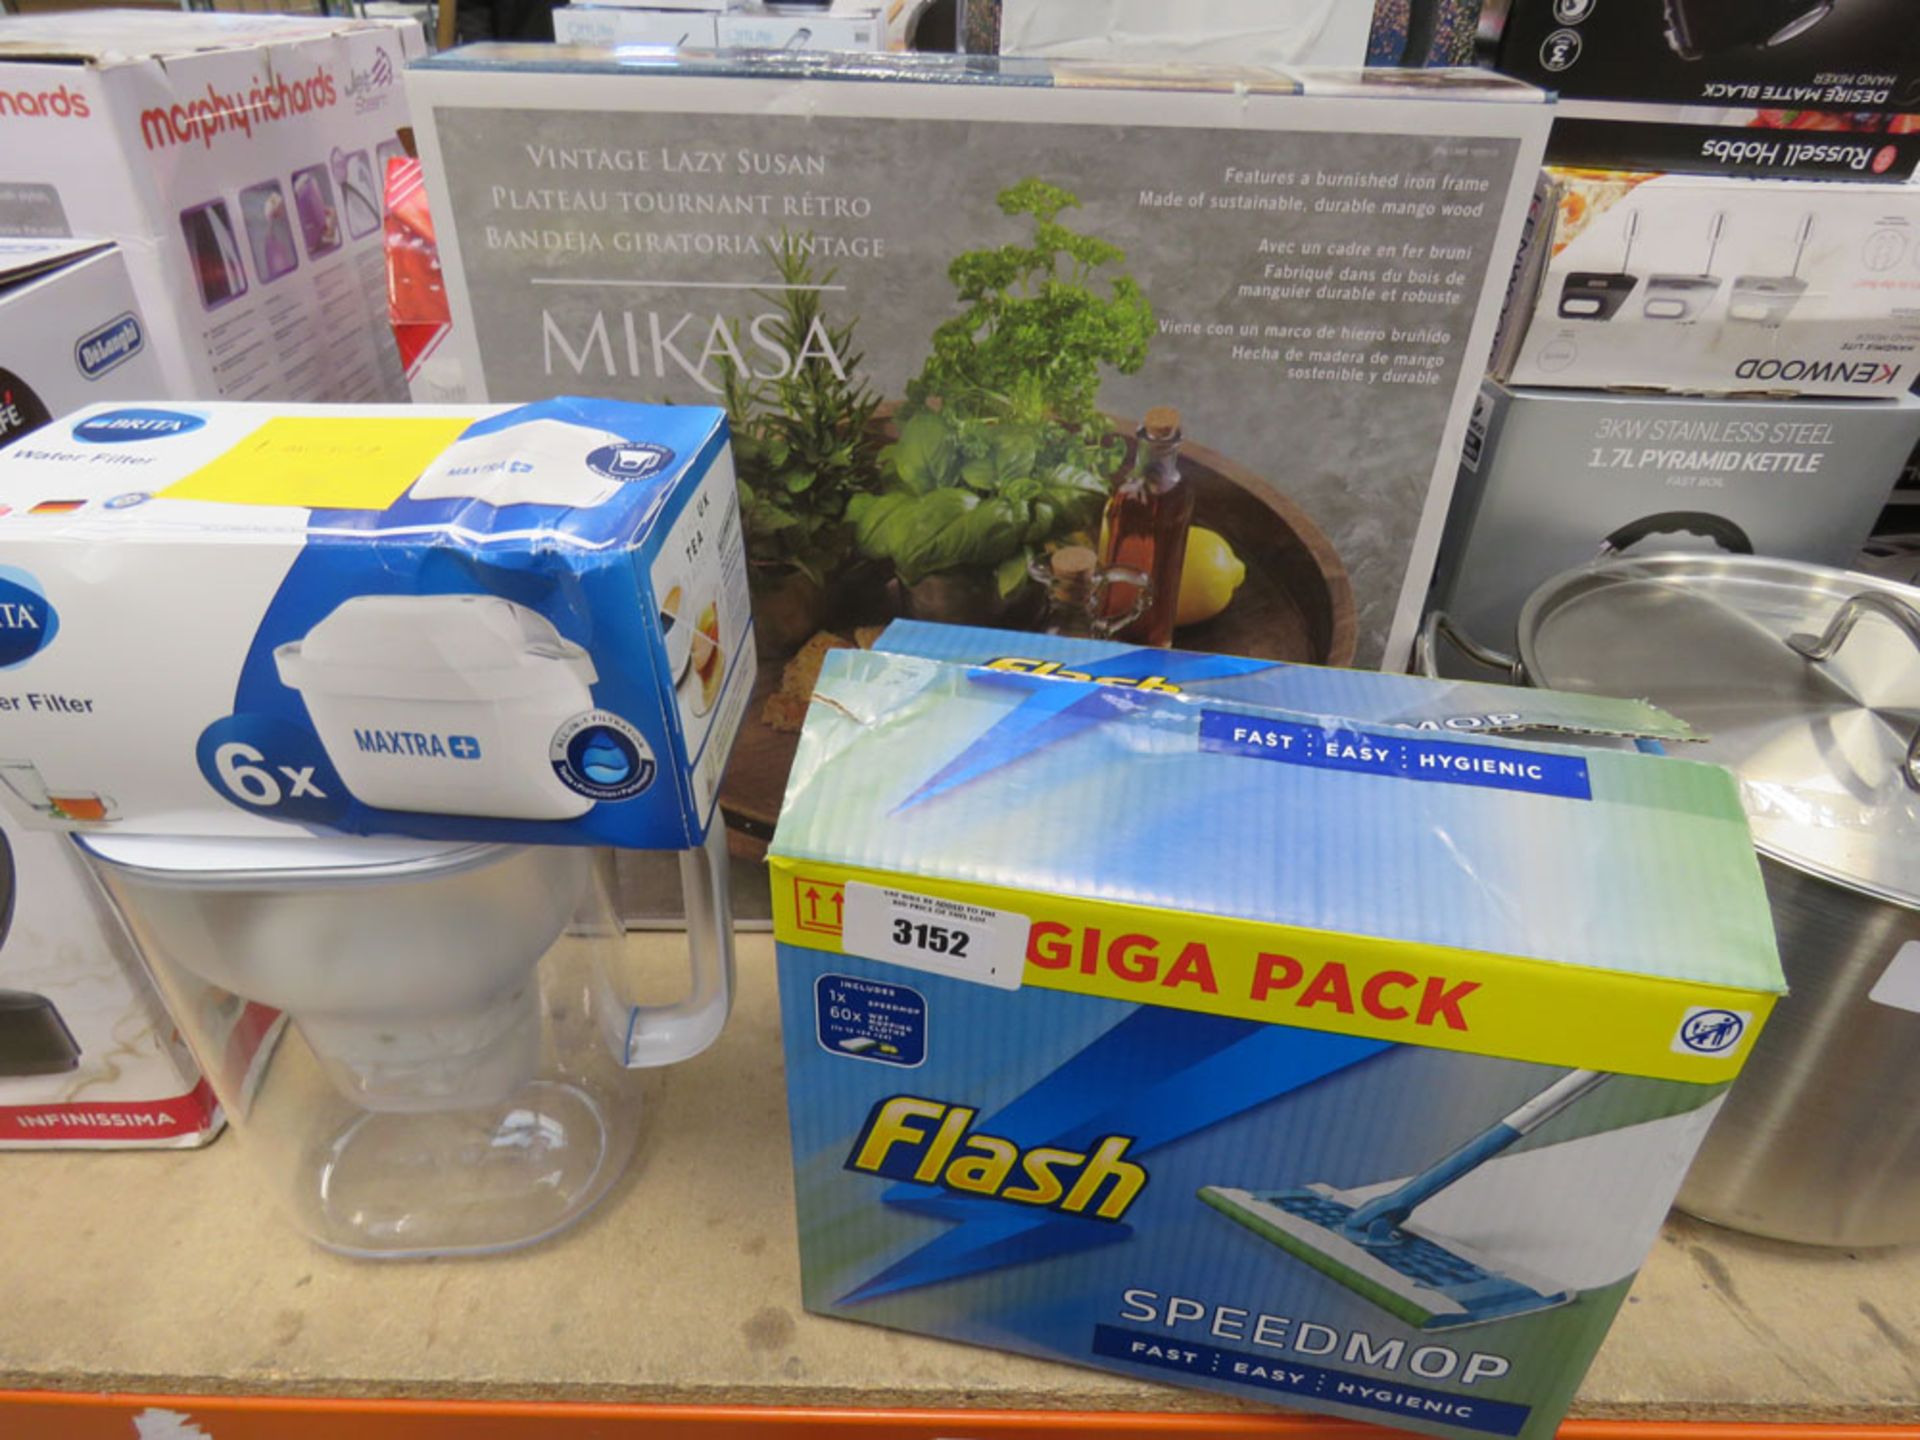 Flash speed mop wipes, Brita water filter with cartridges and vintage lazy susan